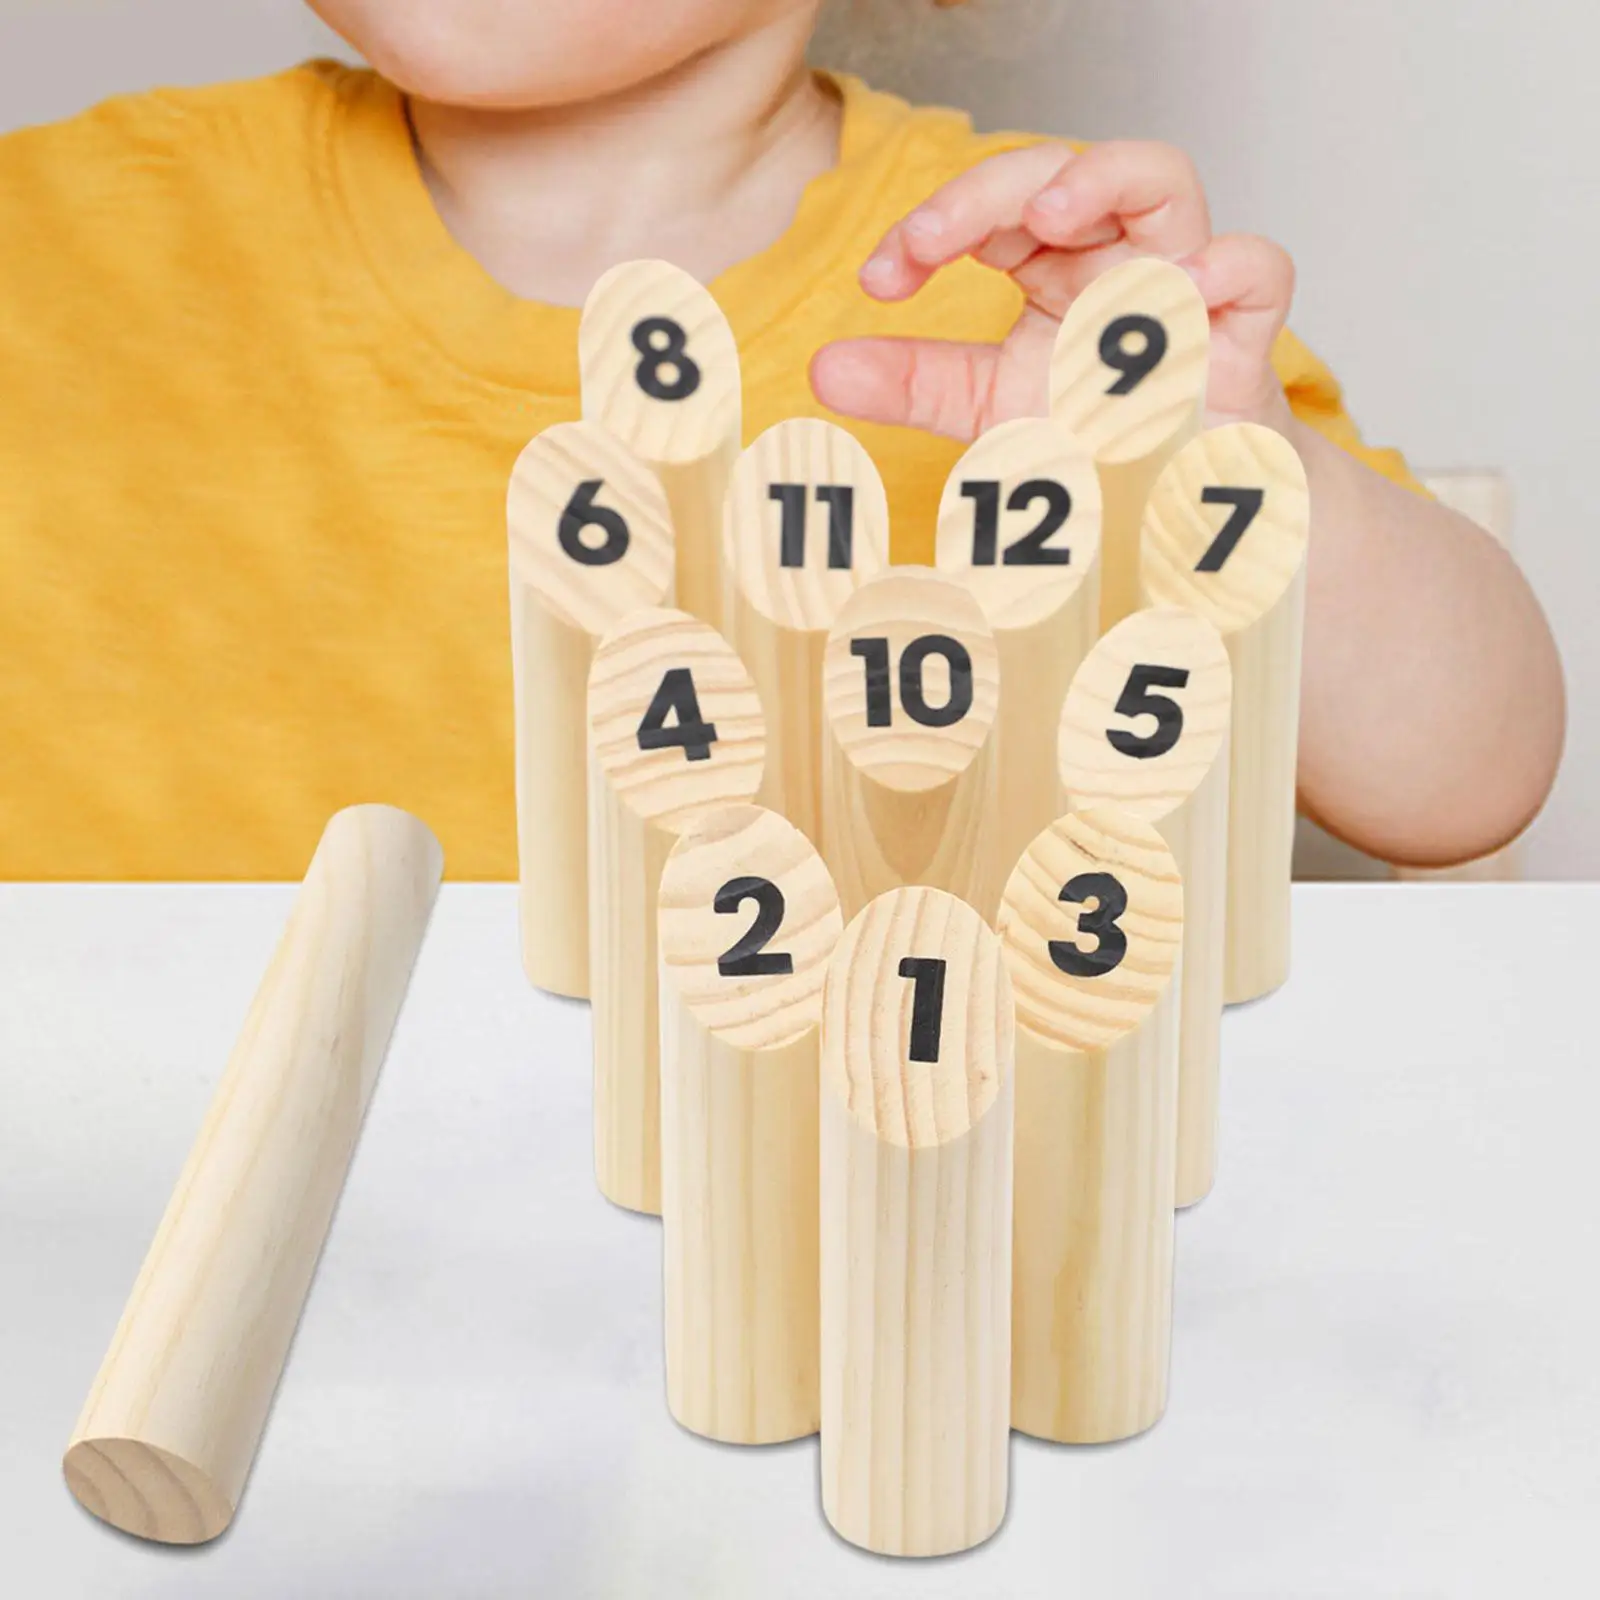 Wooden Toss Game Scatter Family Game Throwing Dowel Numbered blocks yard Game Set for Beach Lawn Backyard Indoor Outdoor Garden